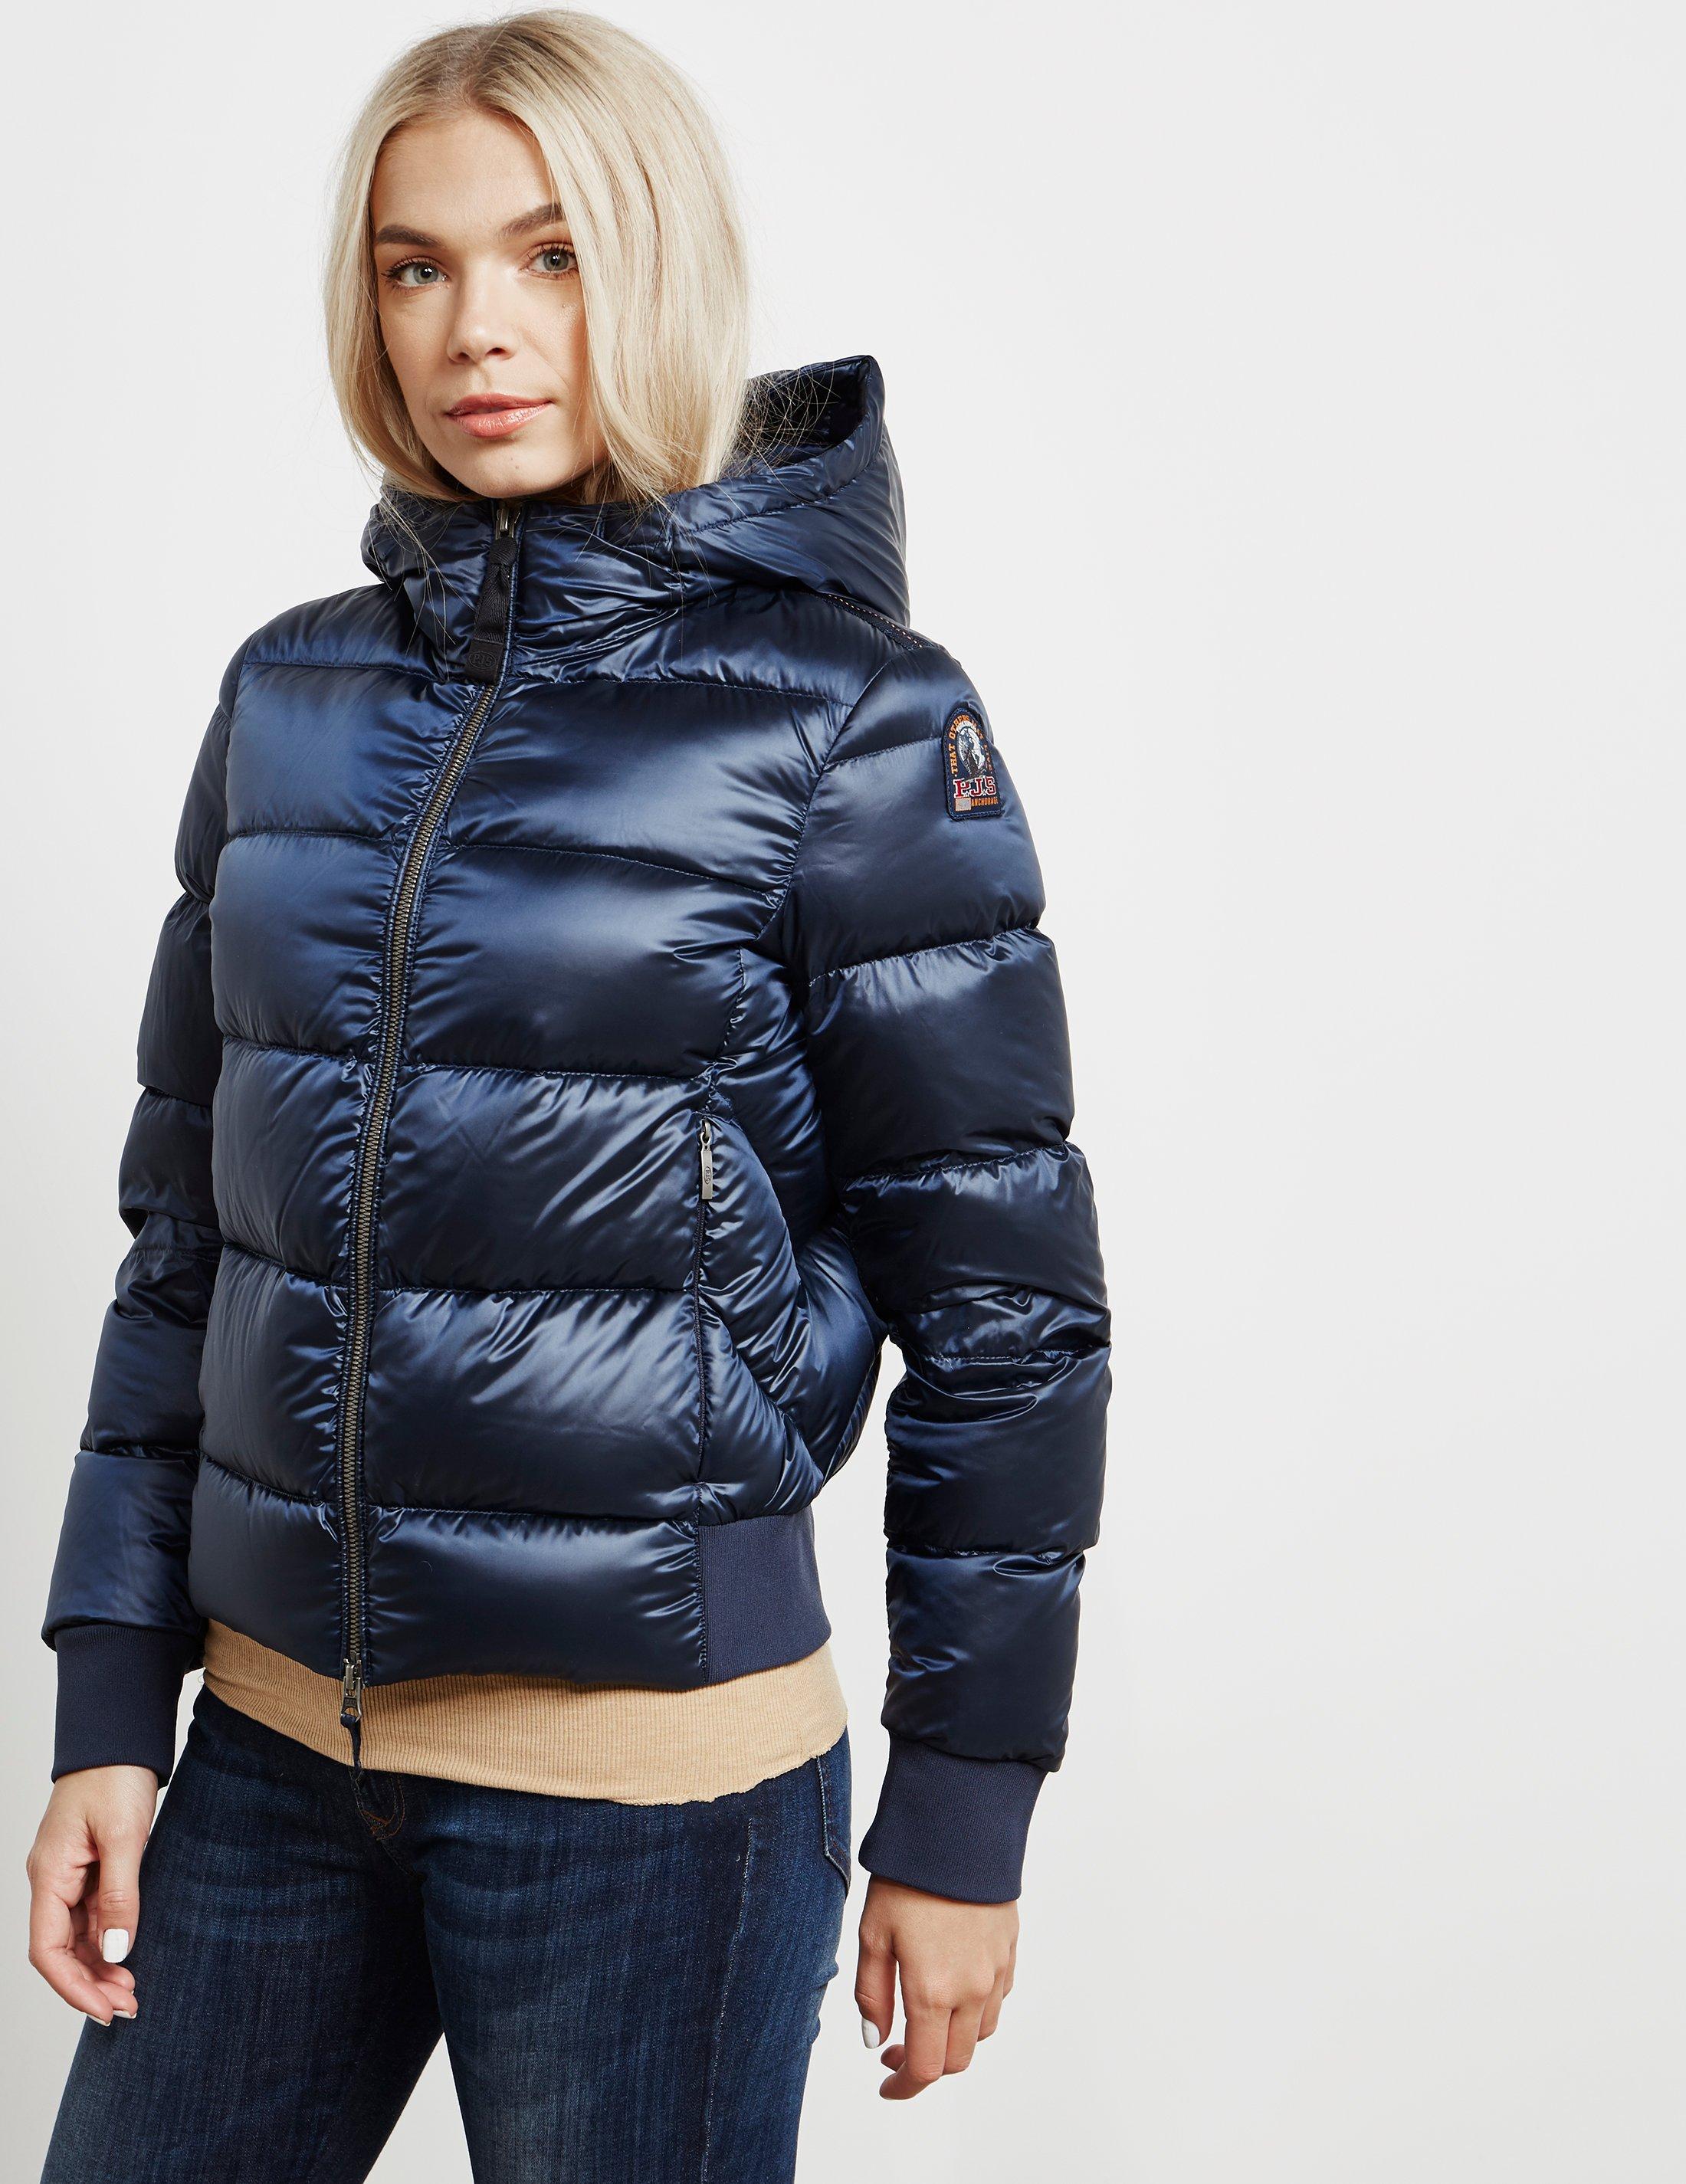 Lyst - Parajumpers Womens Mariah Bomber Jacket Blue in Blue - Save 2. ...